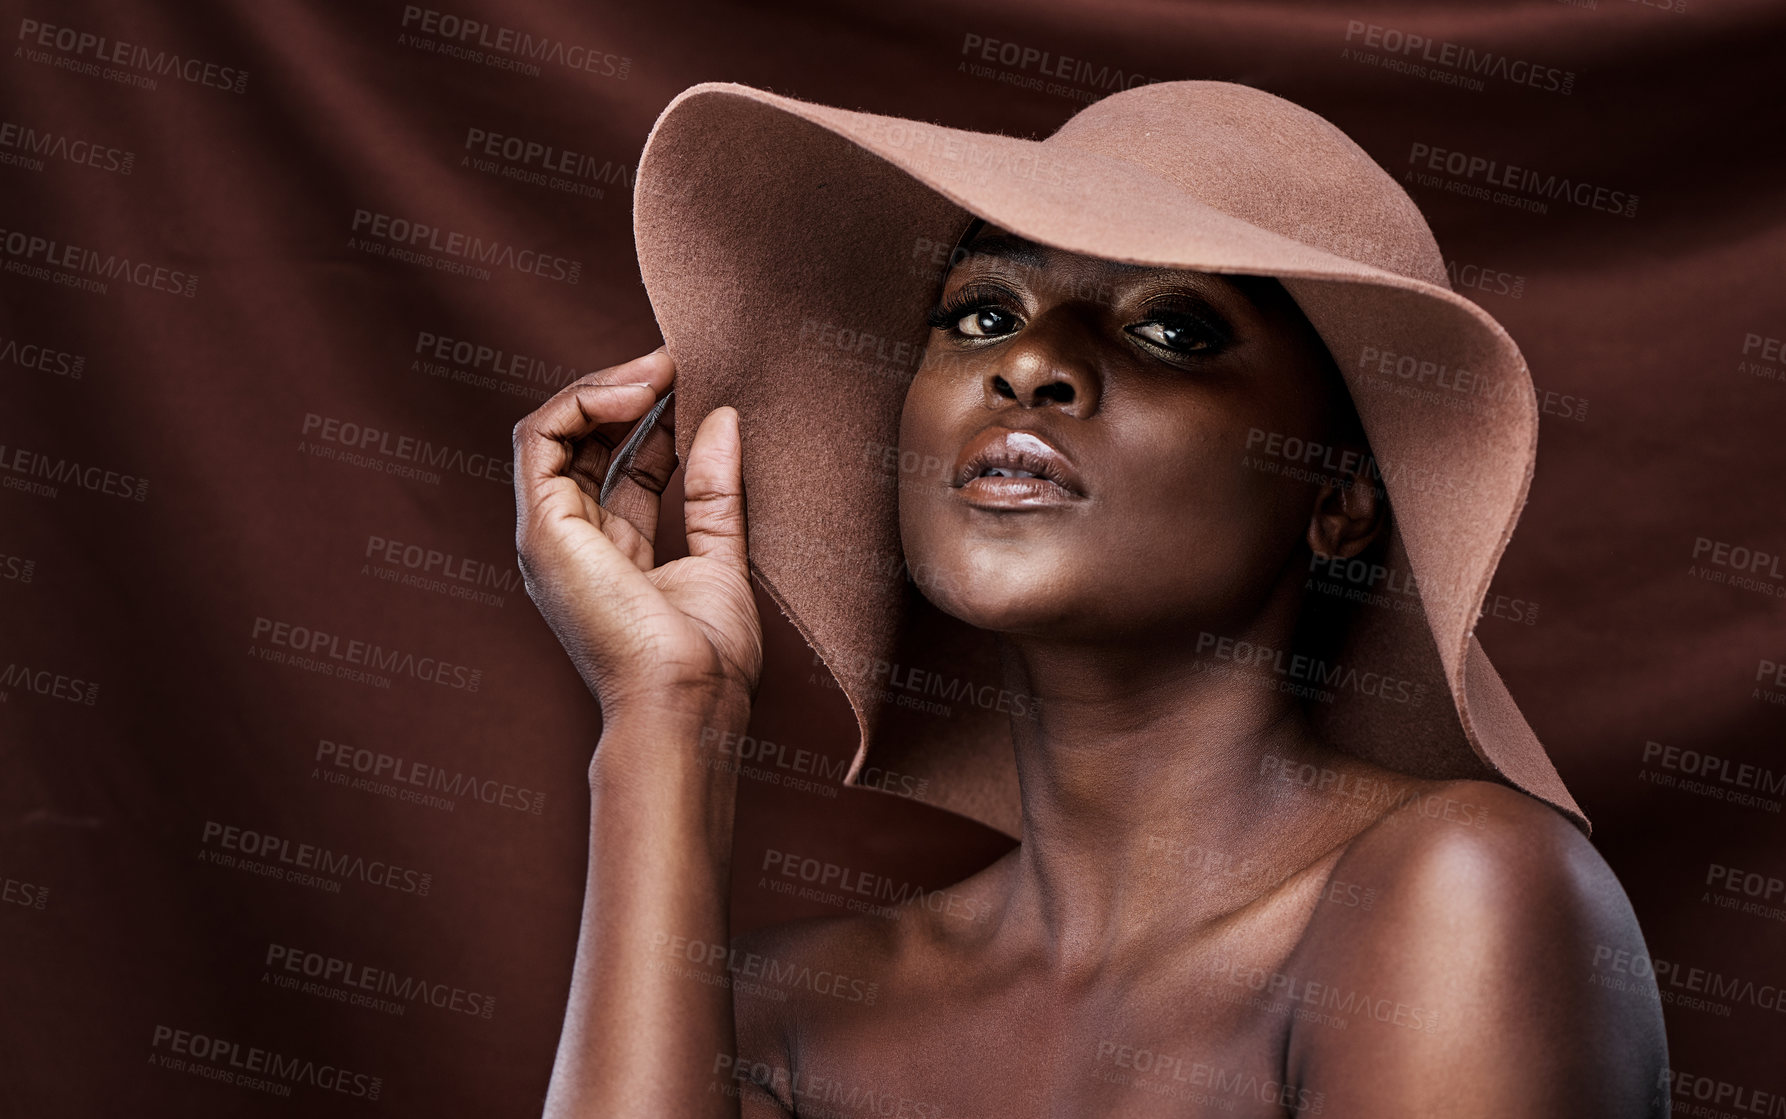 Buy stock photo Shot of a beautiful young woman wearing a hat while posing against a brown background